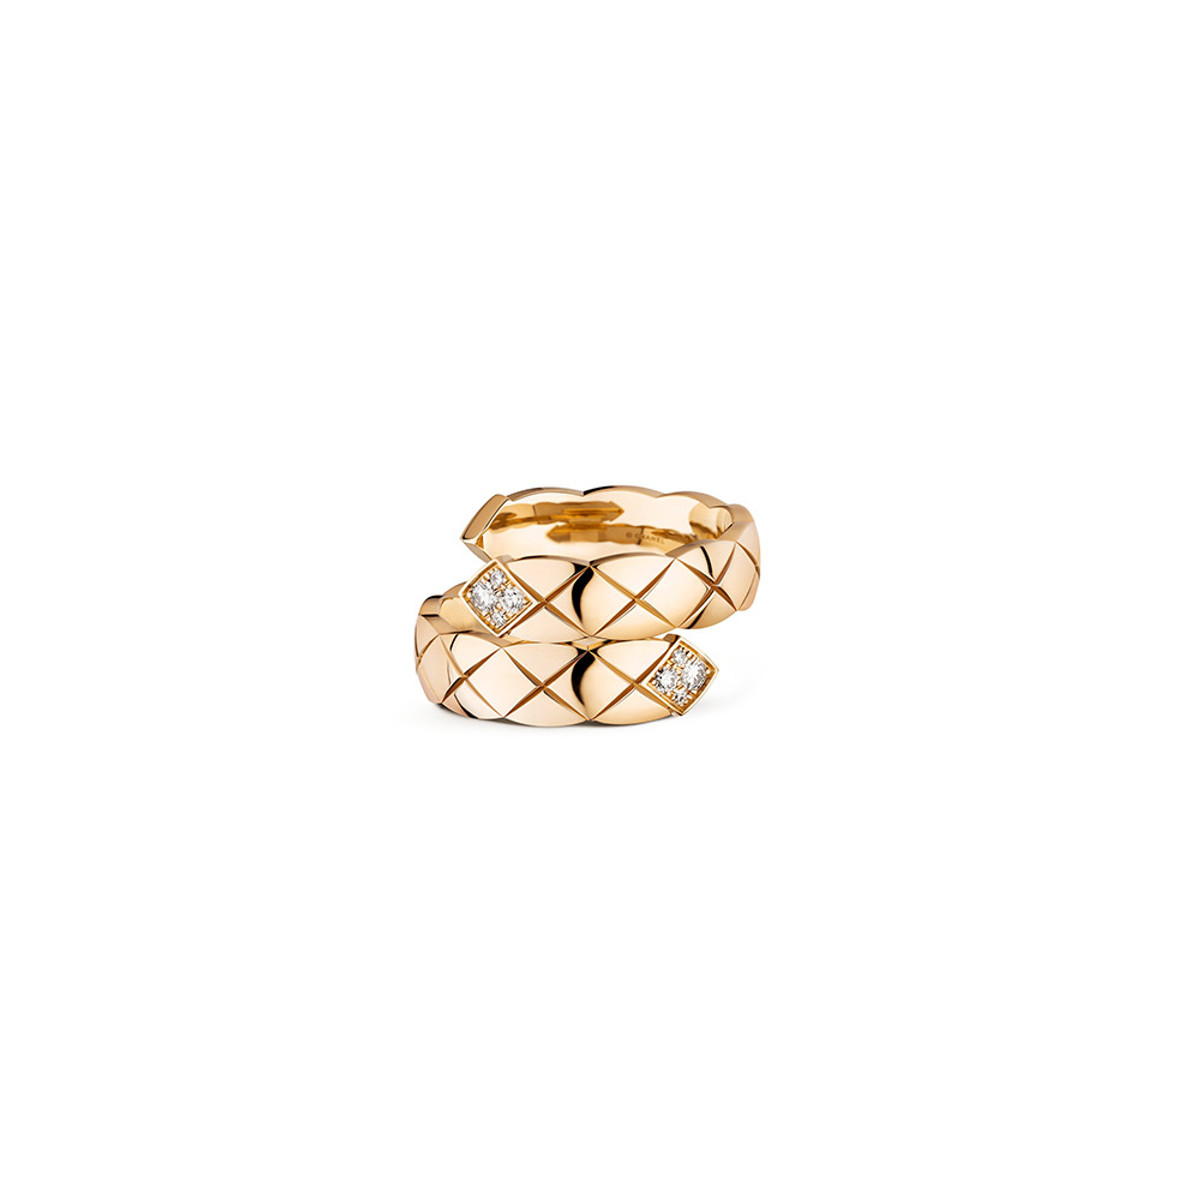 CHANEL COCO CRUSH TOI ET MOI RING-29544